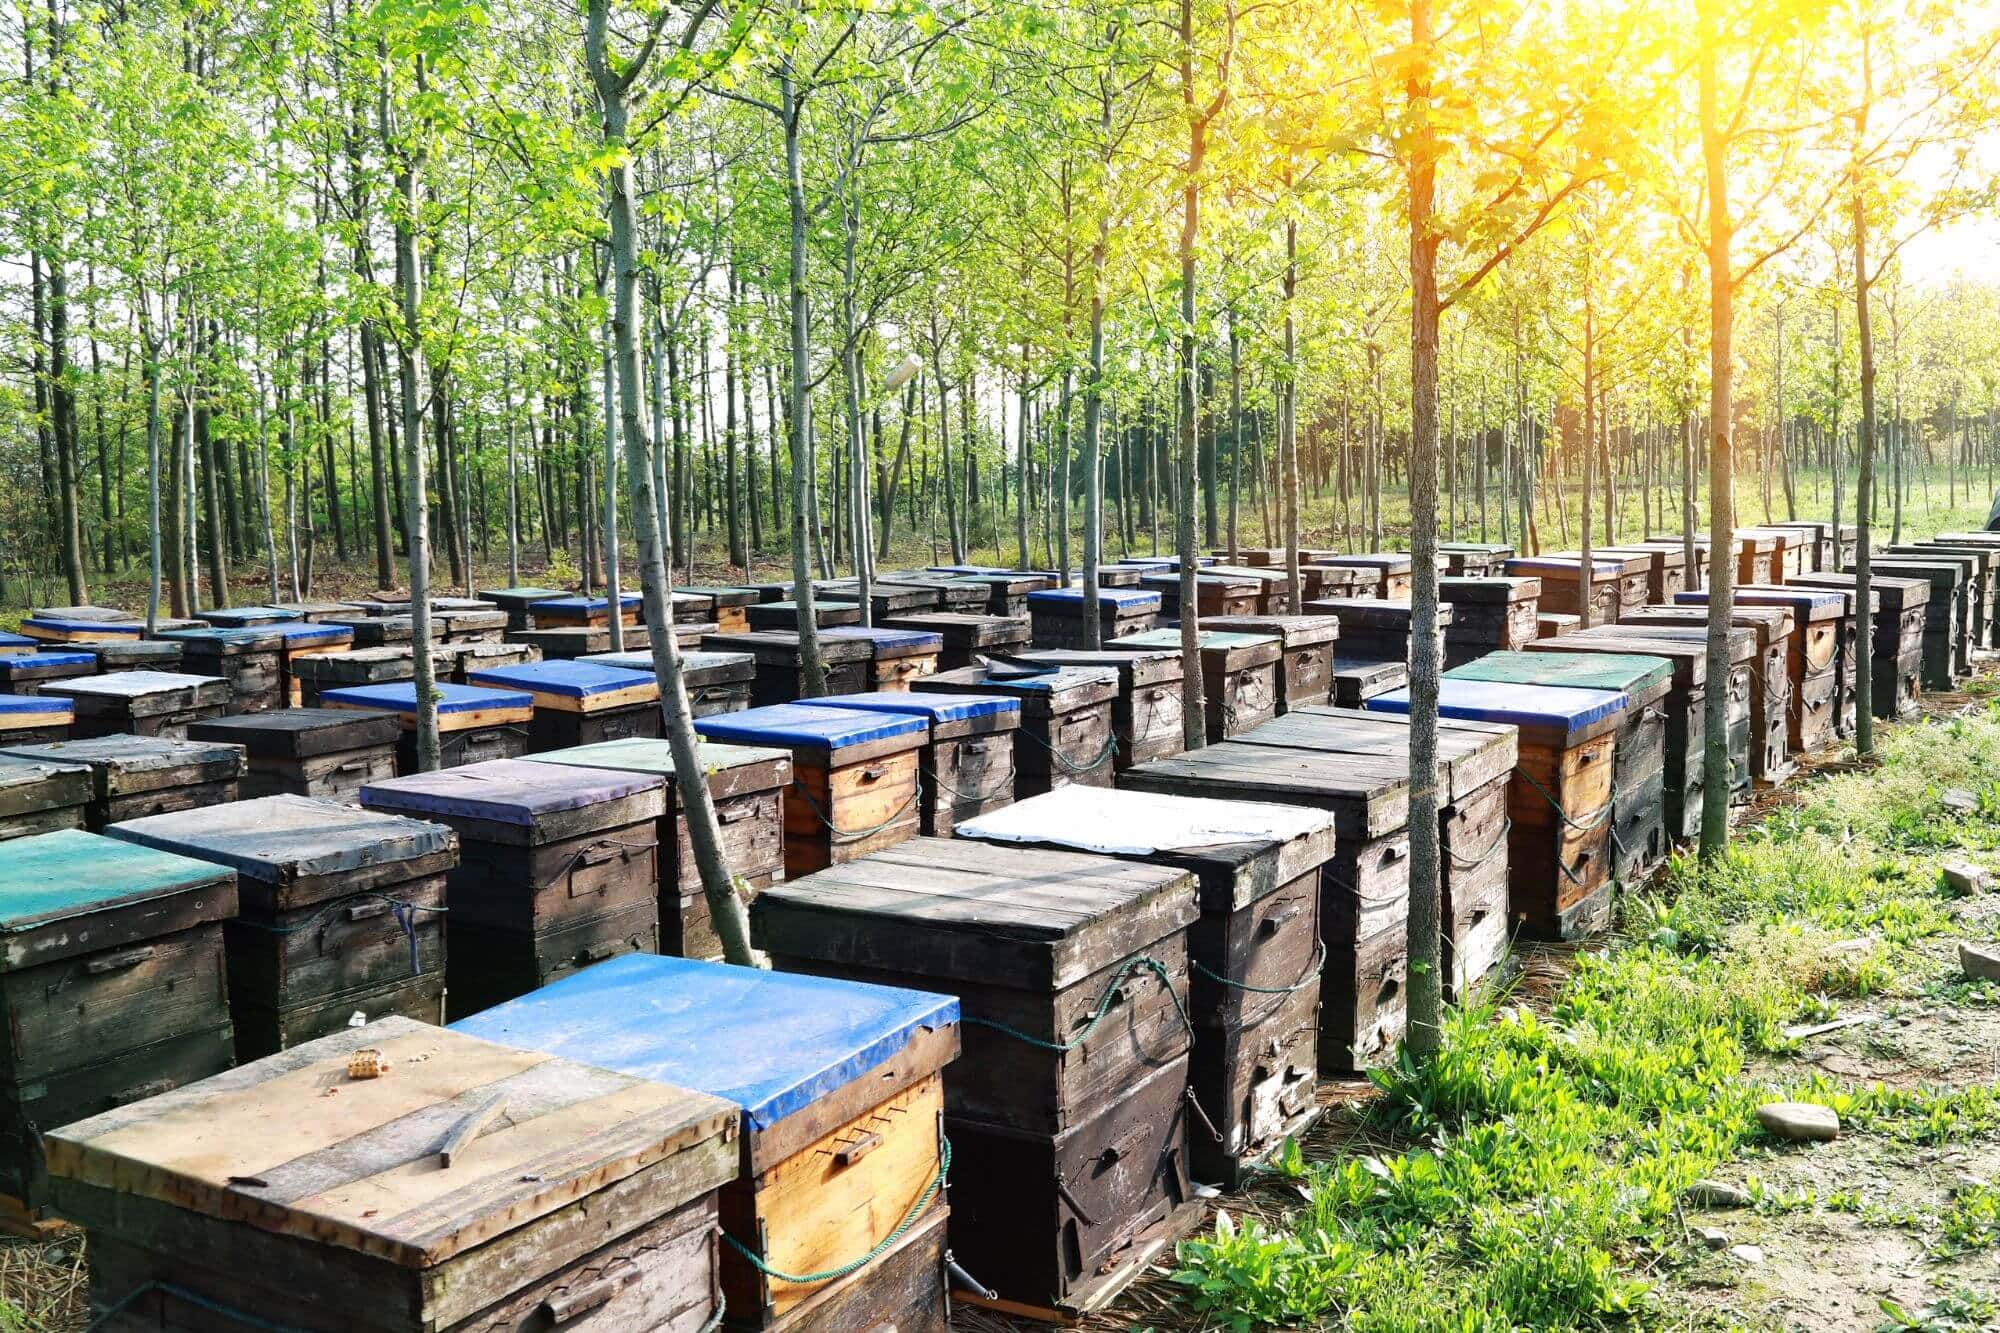 An apiary in China, with lots of wooden bee hives amongst trees